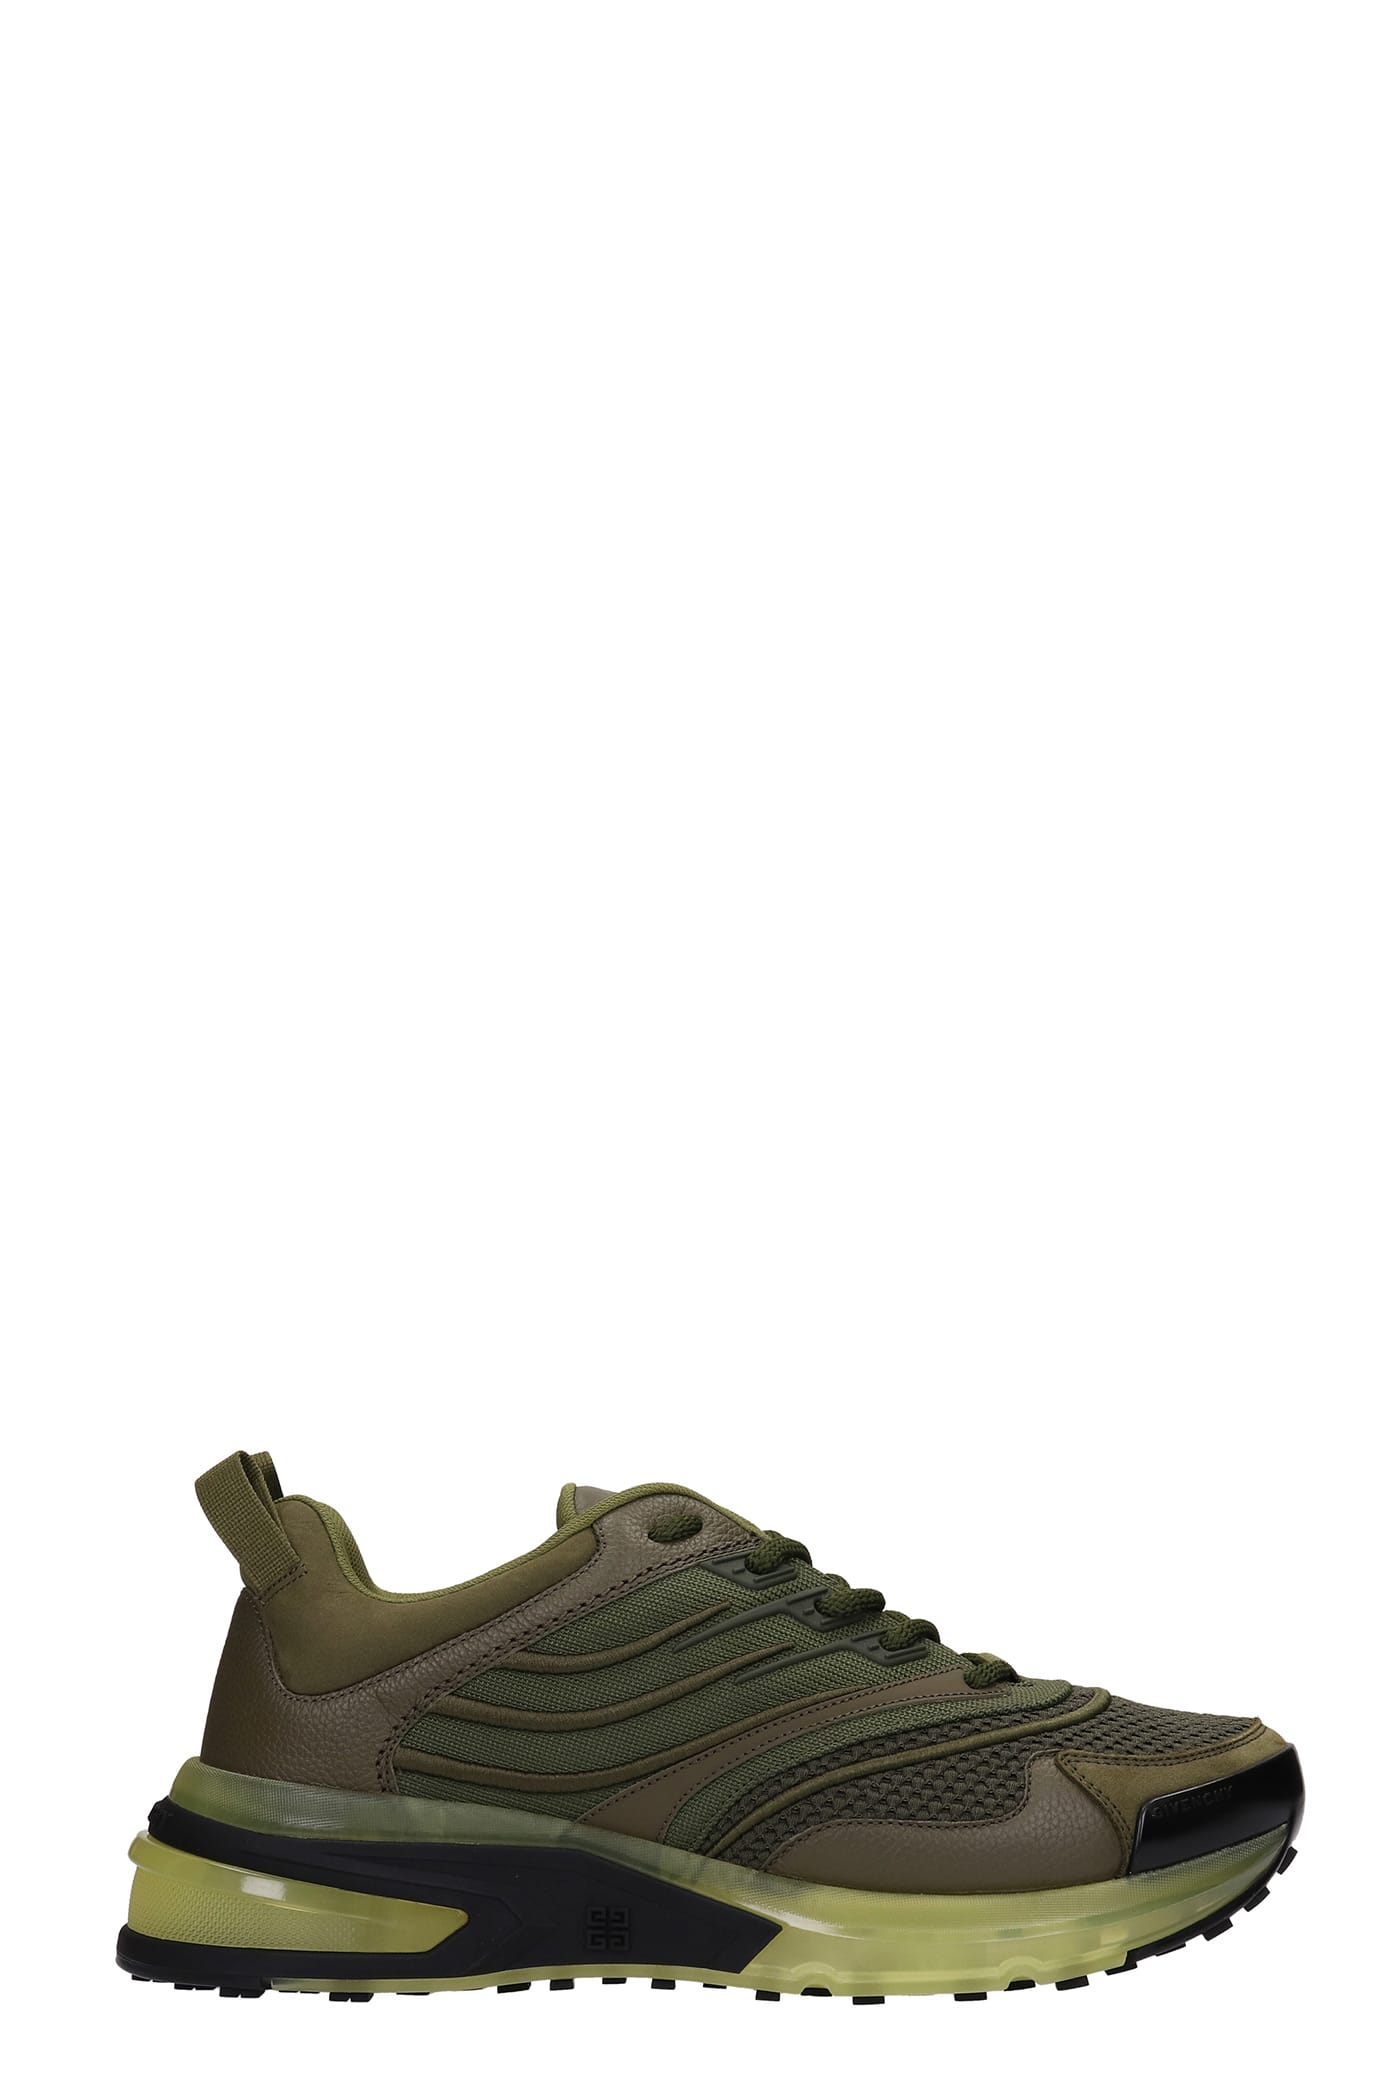 Givenchy Giv 1 Sneakers In Green Synthetic Fibers